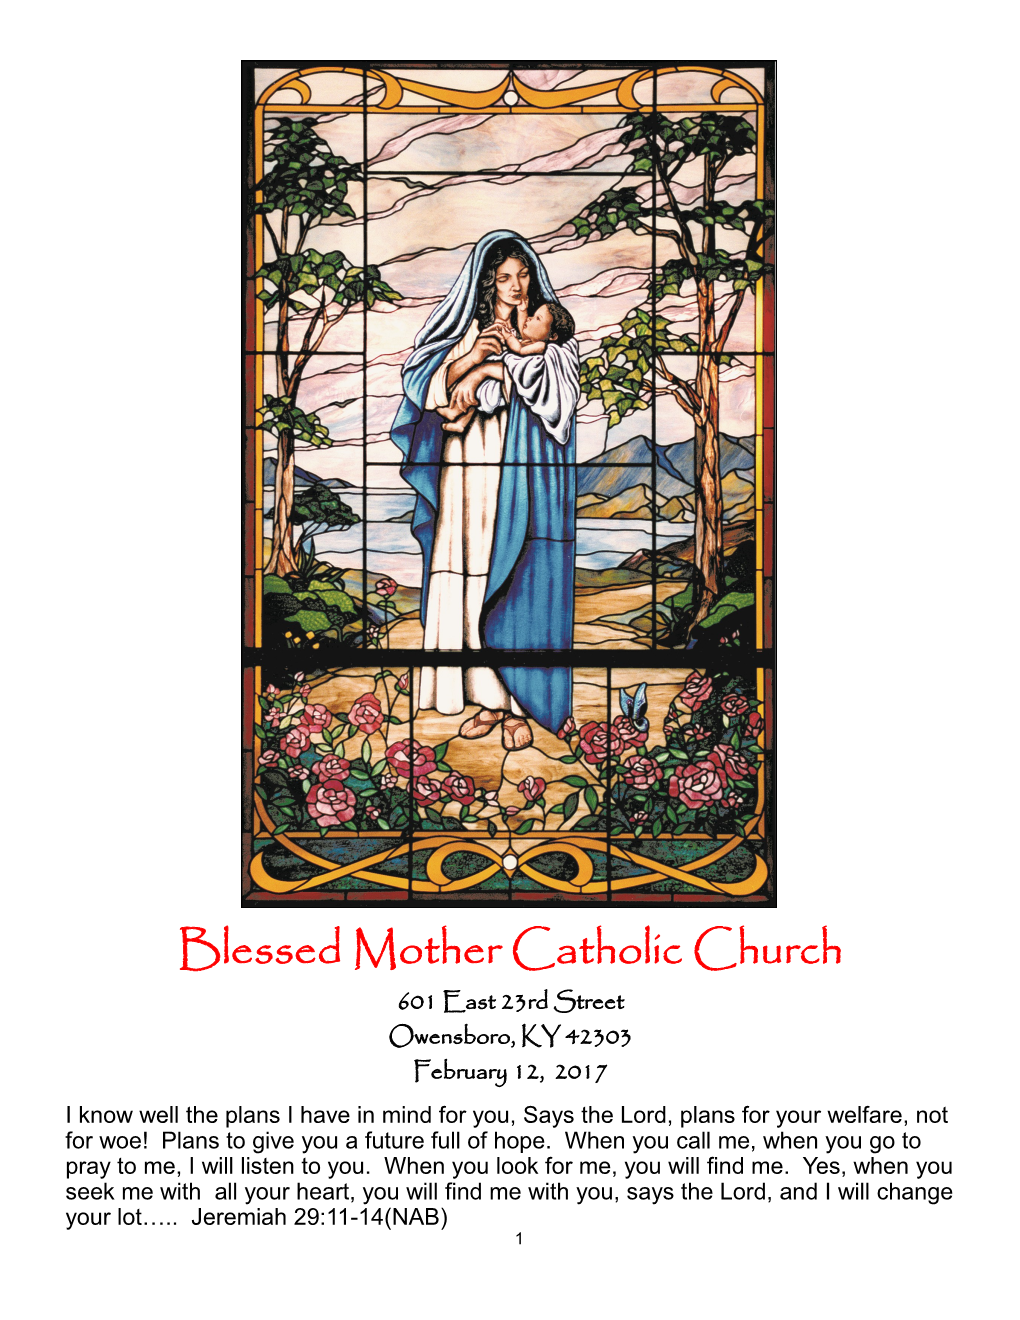 Blessed Mother Catholic Church 601 East 23Rd Street Owensboro, KY 42303 February 12, 2017